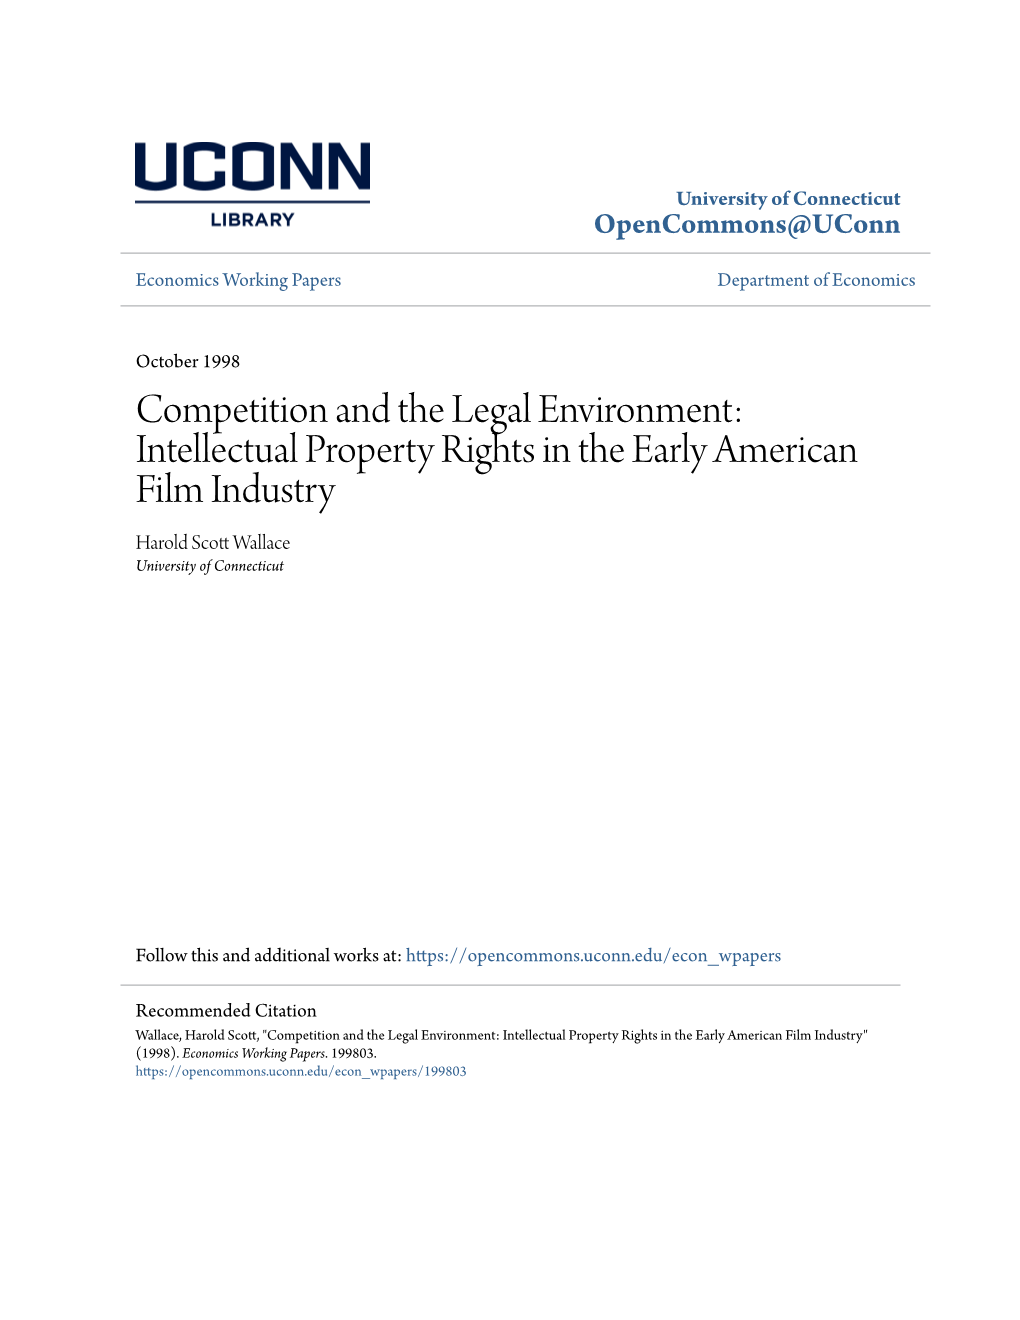 Intellectual Property Rights in the Early American Film Industry Harold Scott Alw Lace University of Connecticut